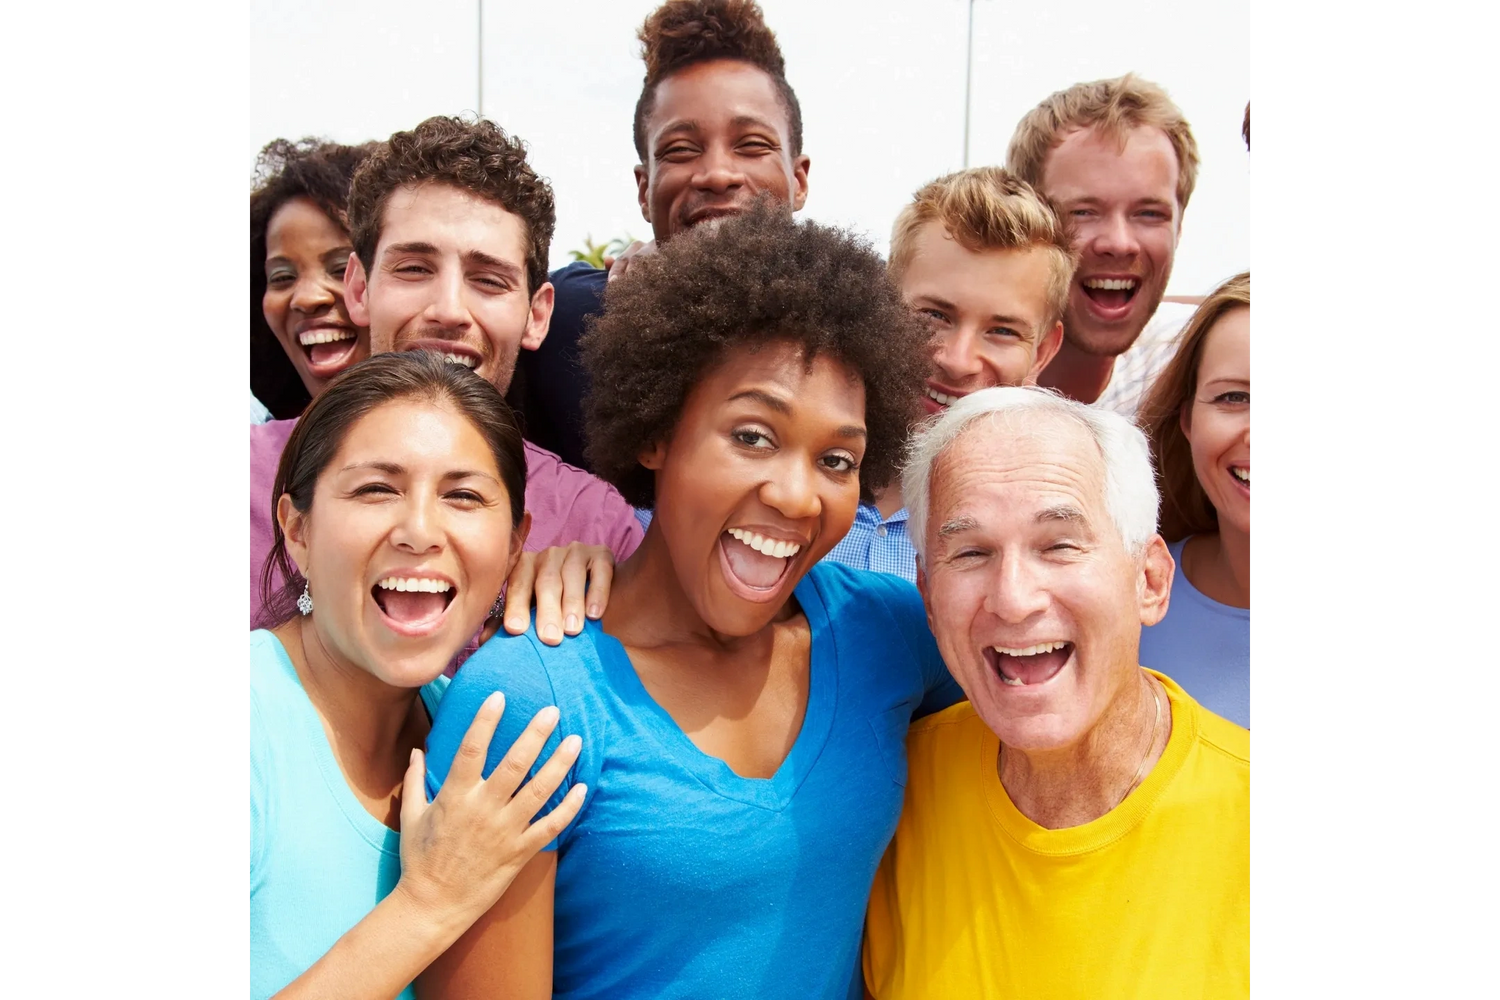 Group of people smiling with healthy teeth after dentist visit